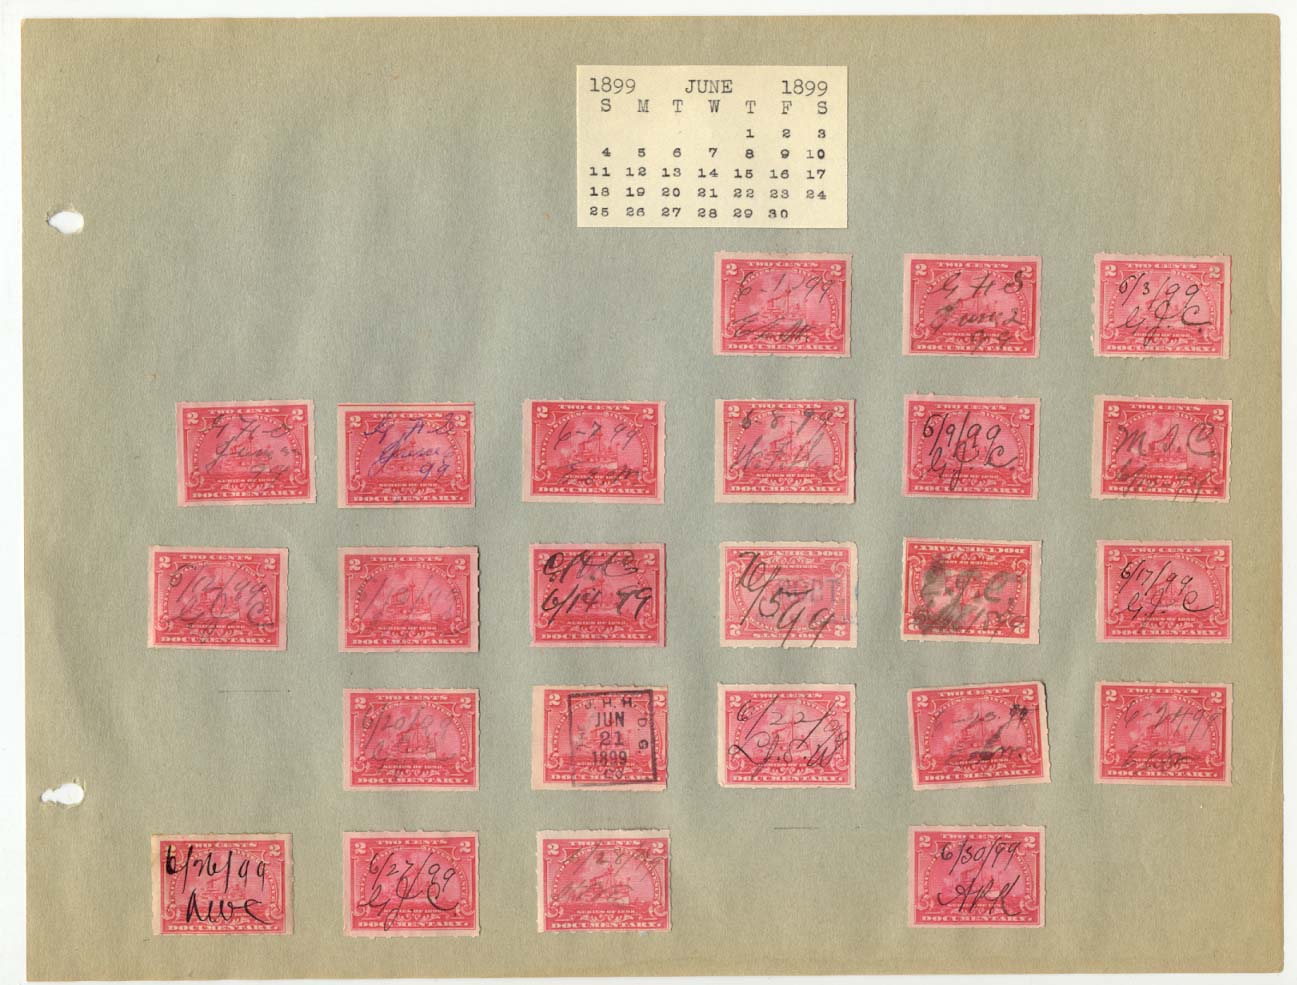 Revenue Stamp Collection June 1899